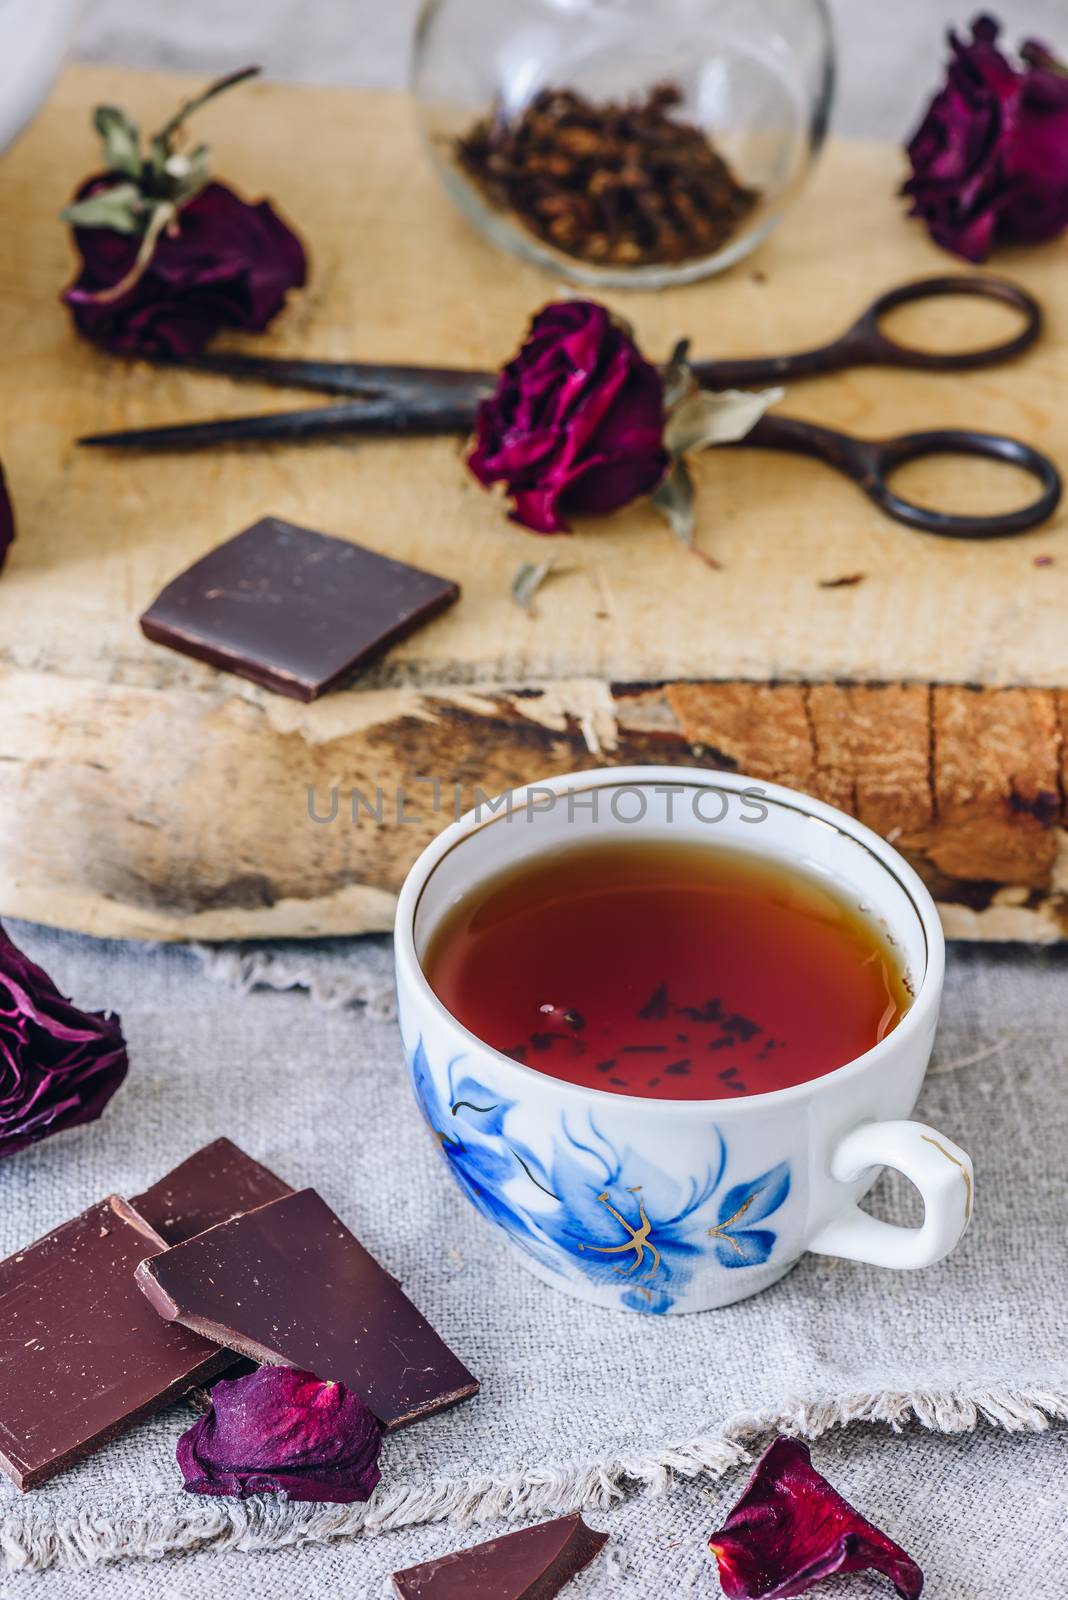 Cup of tea with chocolate by Seva_blsv